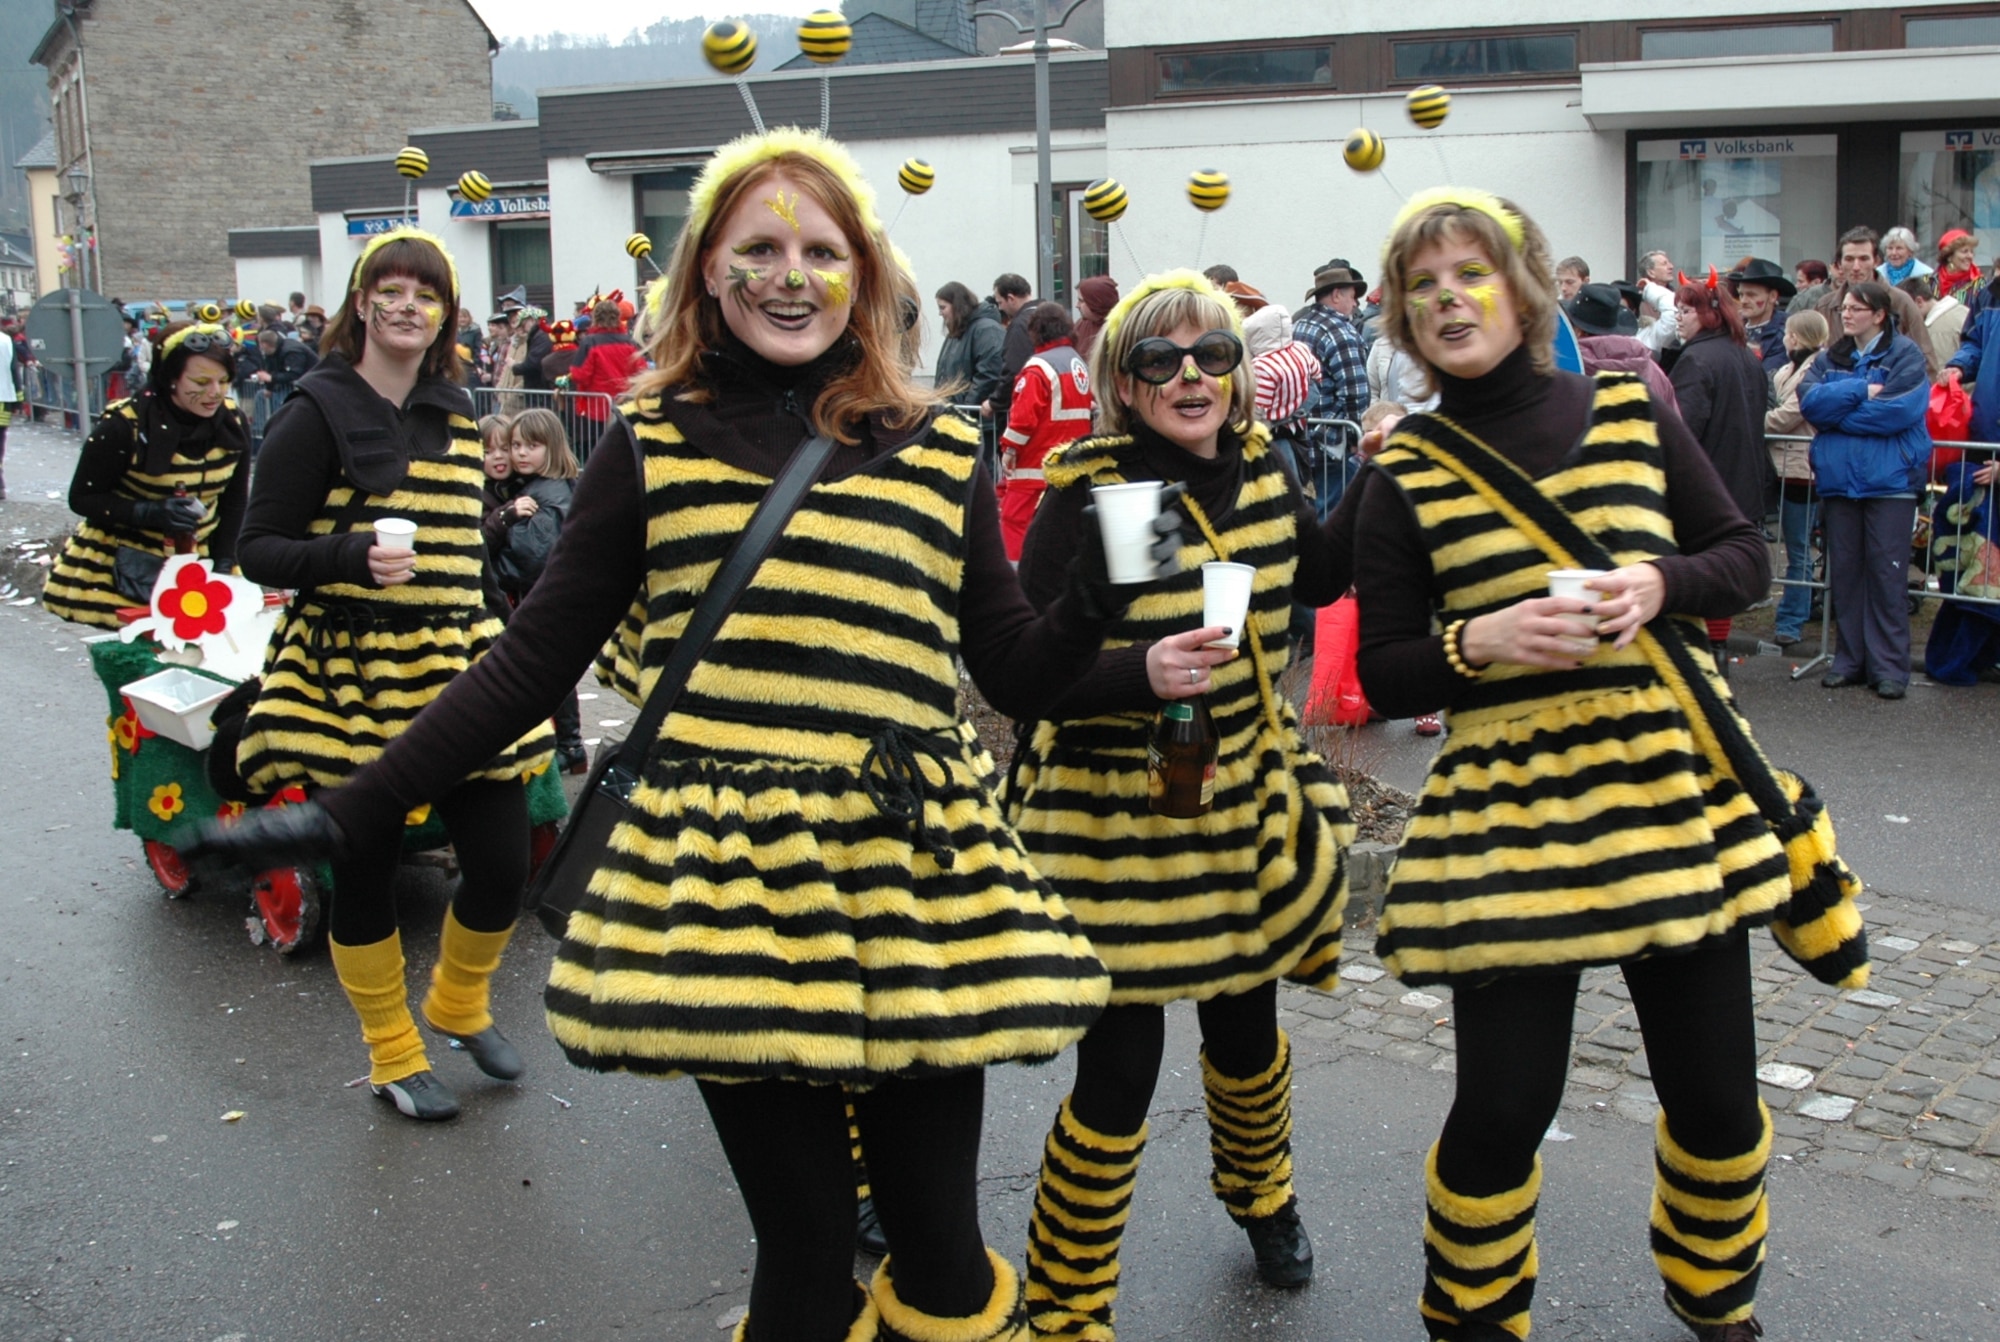 KORDEL, Germany – Women and their children, dressed-up in bee costumes for the Kordel fashing parade, greet onlookers Feb. 22, 2009. The costume was nice and warm, perfect for the cold weather. Almost every village in Germany, regardless of size, conducts a fashing parade. (U.S. Air Force photo by Iris Reiff)